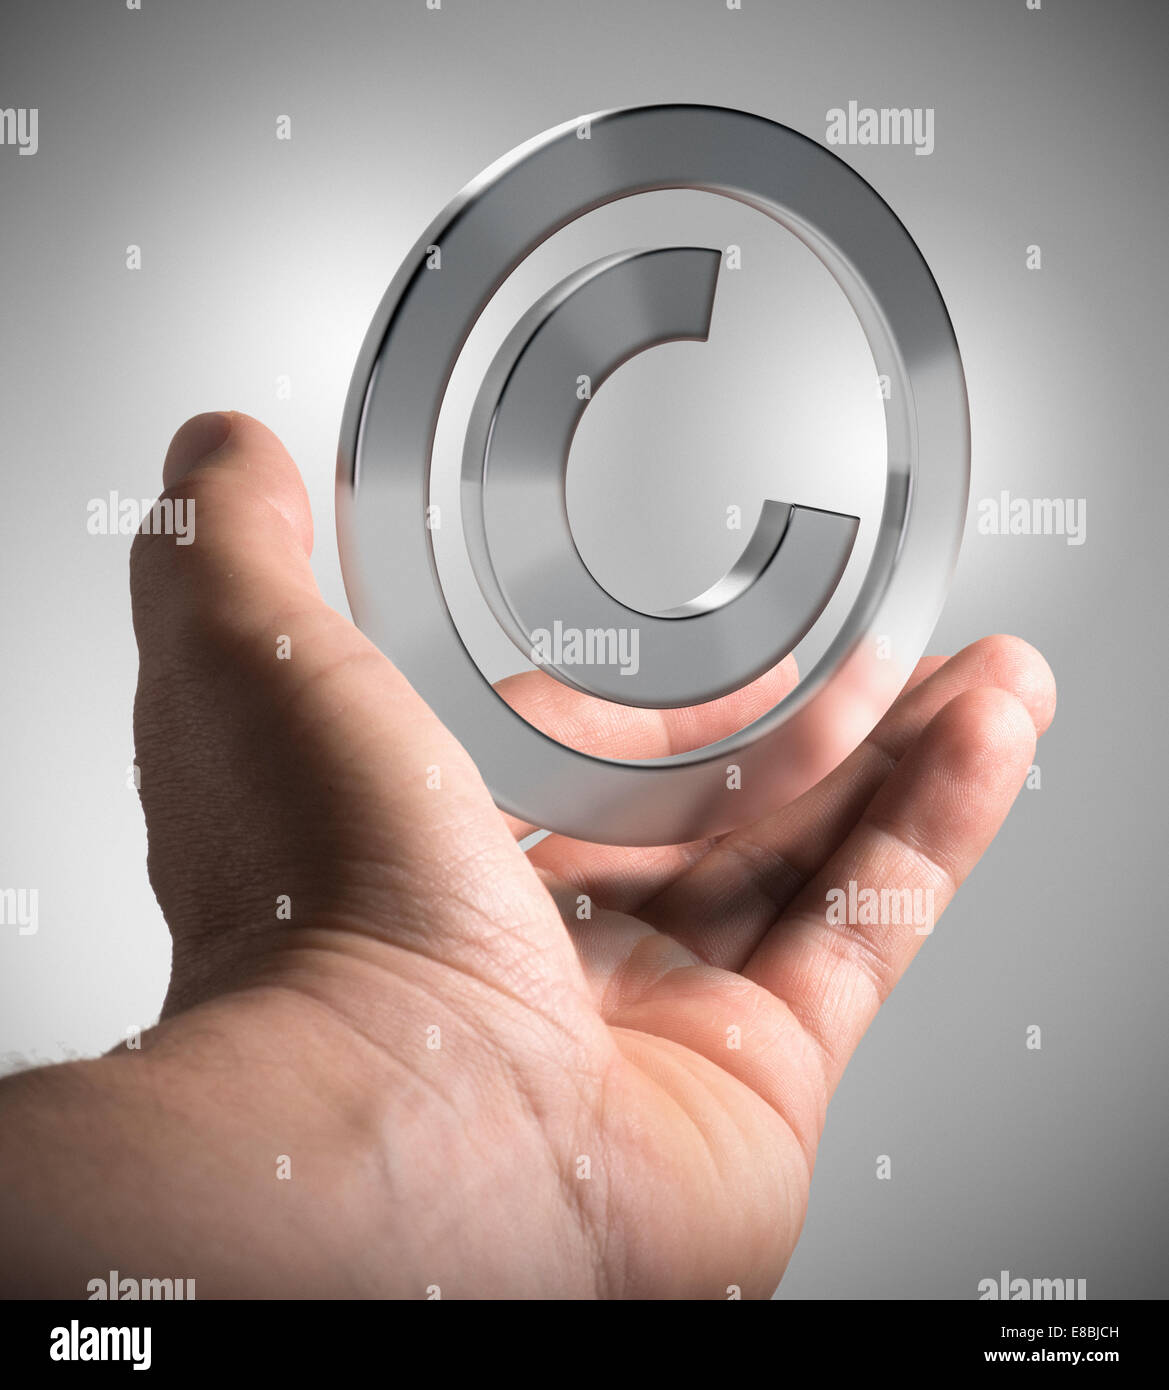 Man hand holding copyright symbol over grey background, concept image for illustration  of intellectual property. Stock Photo